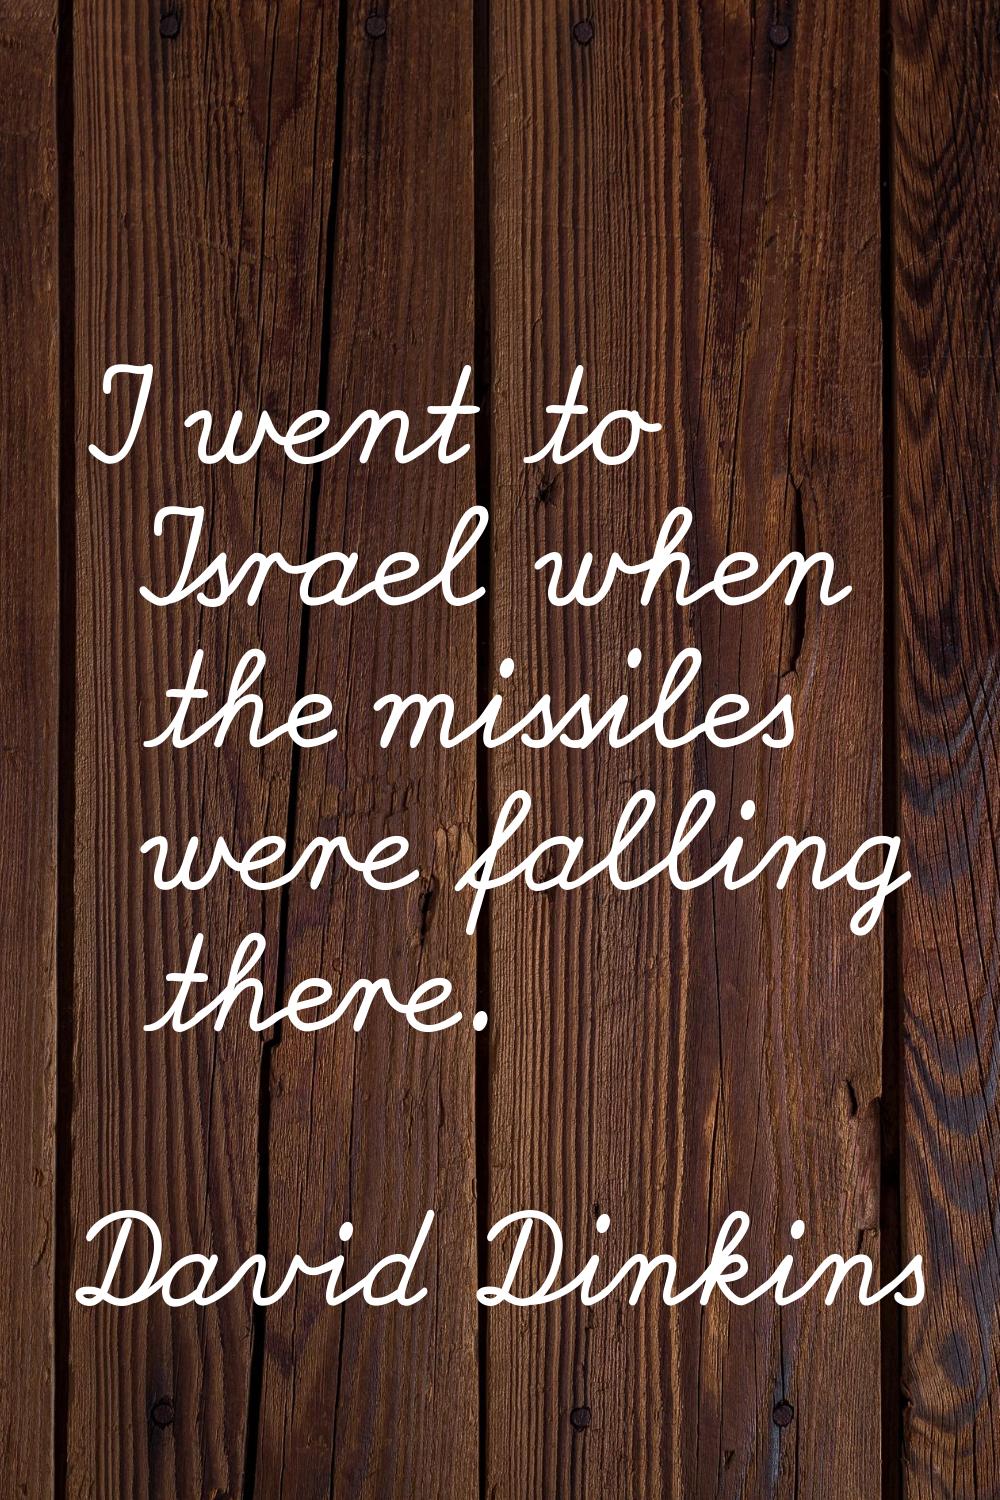 I went to Israel when the missiles were falling there.